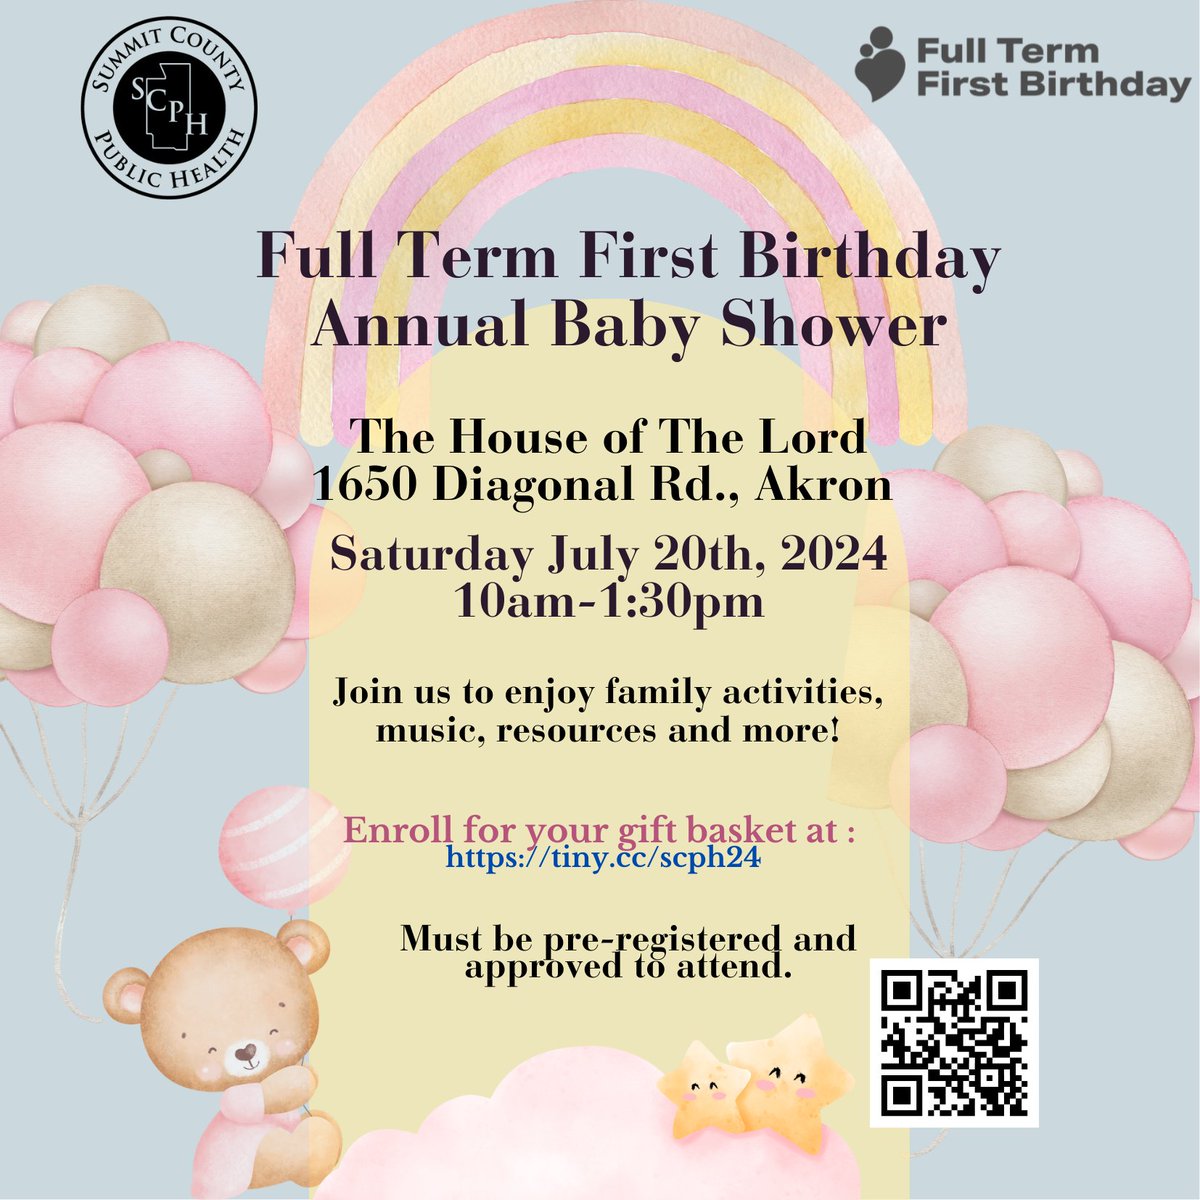 Registration is now open for the annual Full Term First Birthday Baby Shower! Please help us spread the word about this event so we can reach as many expecting mothers and families as possible! okt.to/tBmeoV